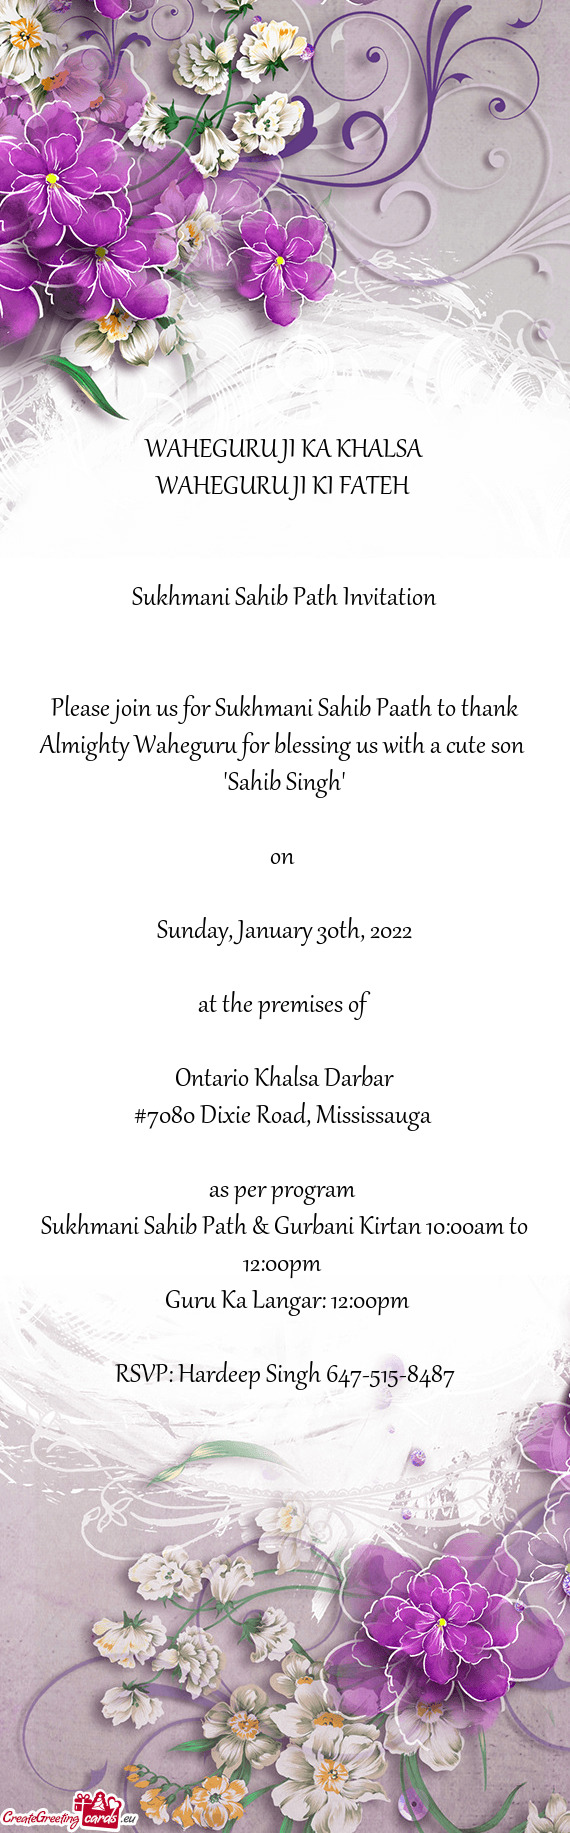 Please join us for Sukhmani Sahib Paath to thank Almighty Waheguru for blessing us with a cute son